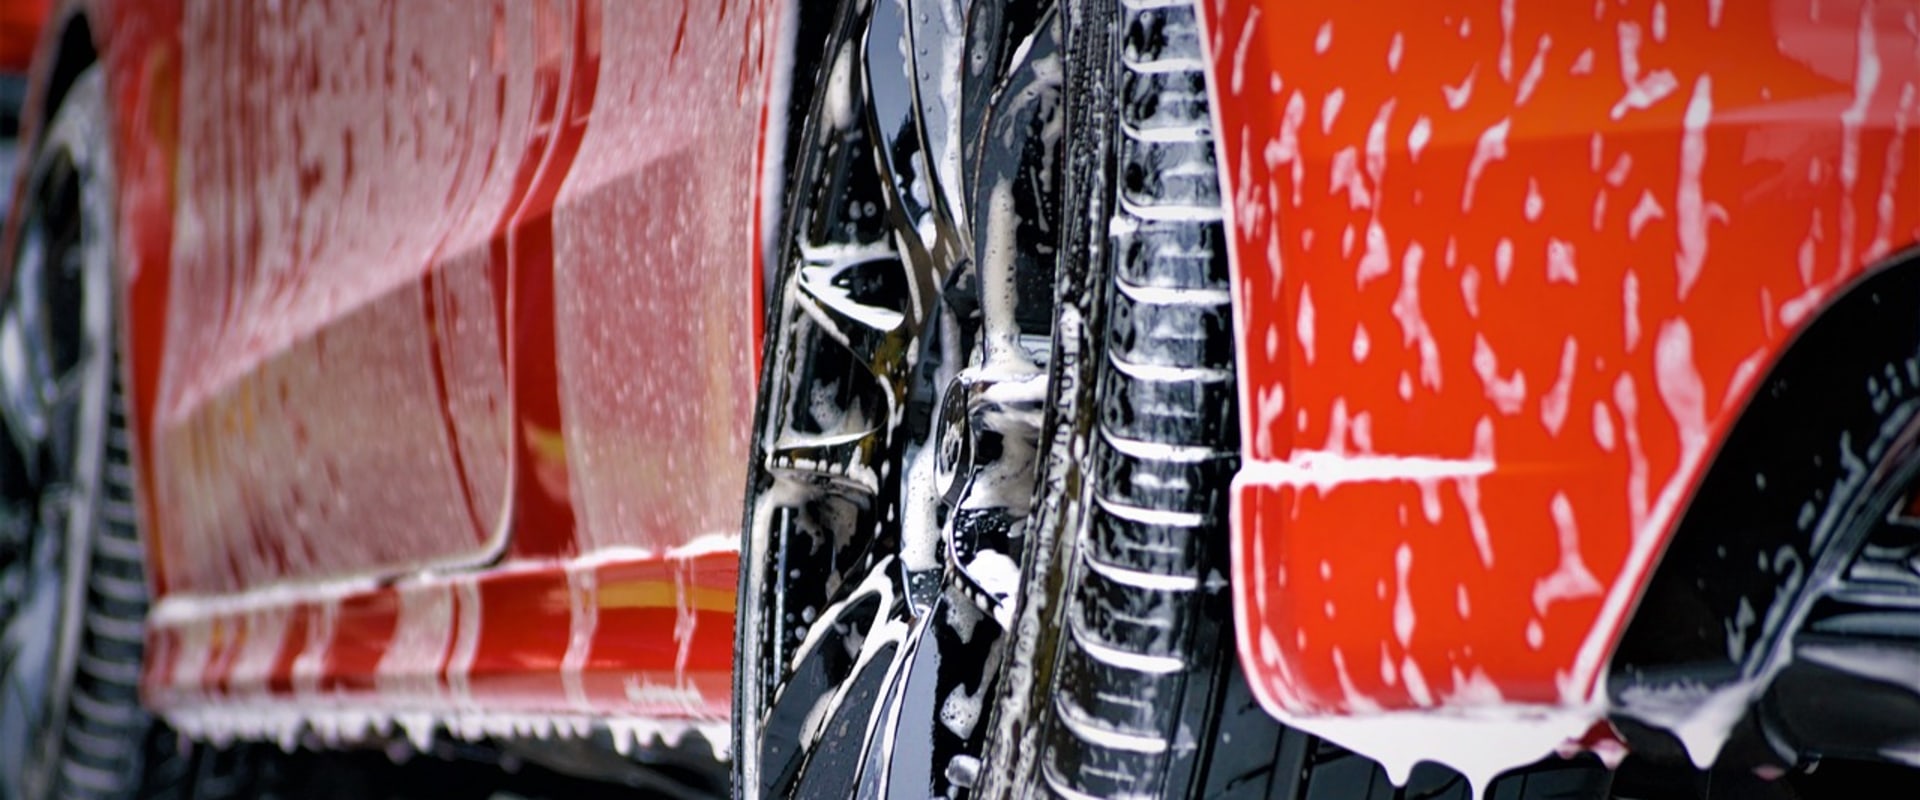 Where to Find the Best Auto Detailing Services in Bay Ridge, Brooklyn, NY